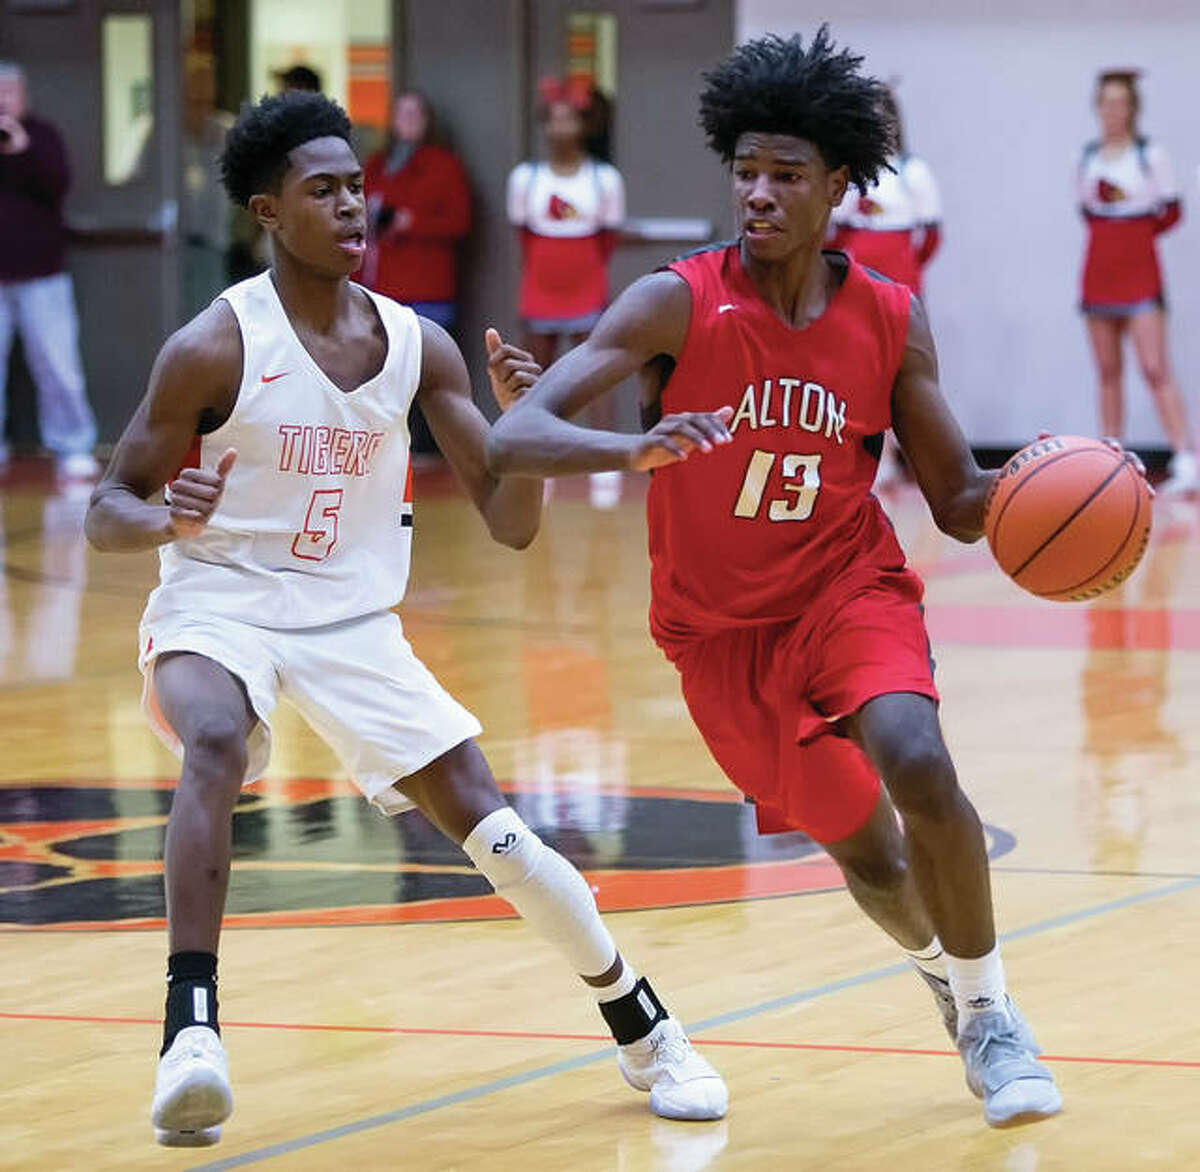 Alton’s Malik Smith (right) dribbles past Edwardsville’s Lavontas Hairston during the first half Friday night in Edwardsville.